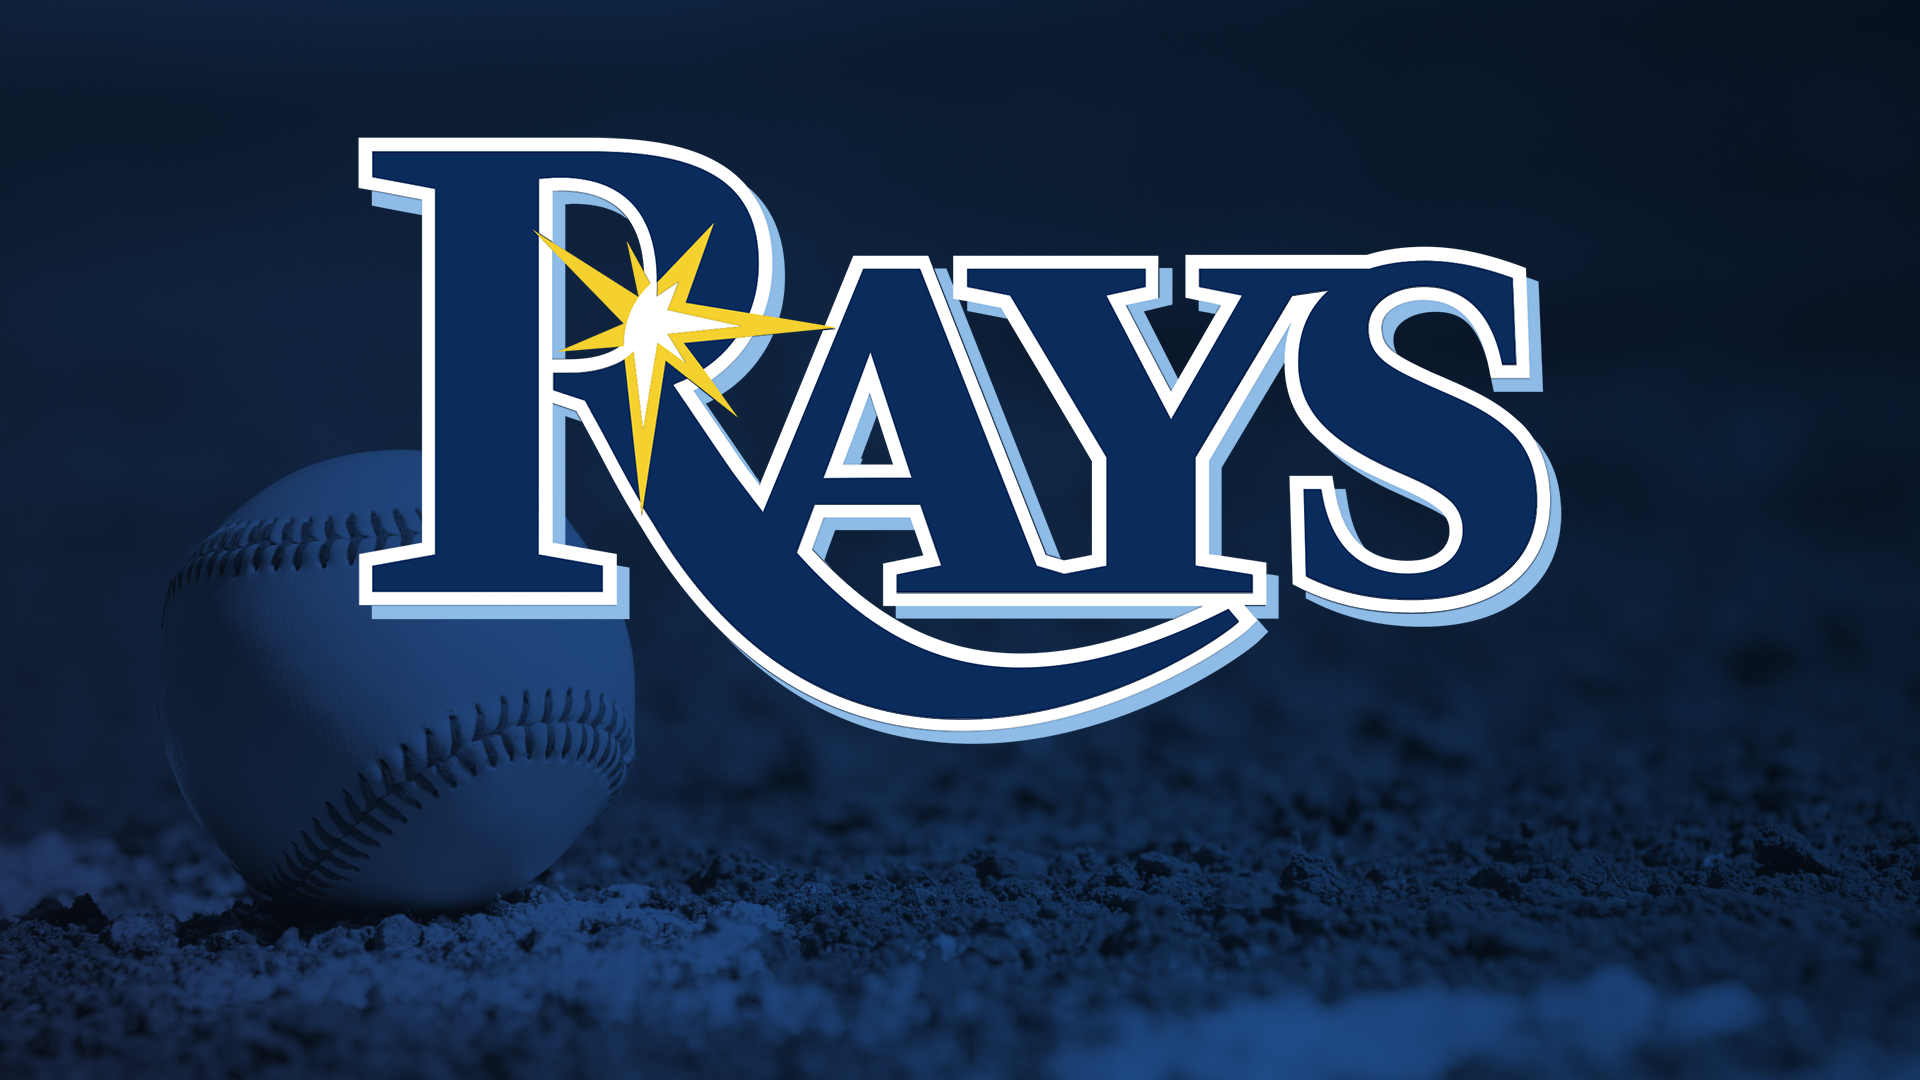 Rays 2022 schedule released, with Opening Day in Boston vs. Red Sox